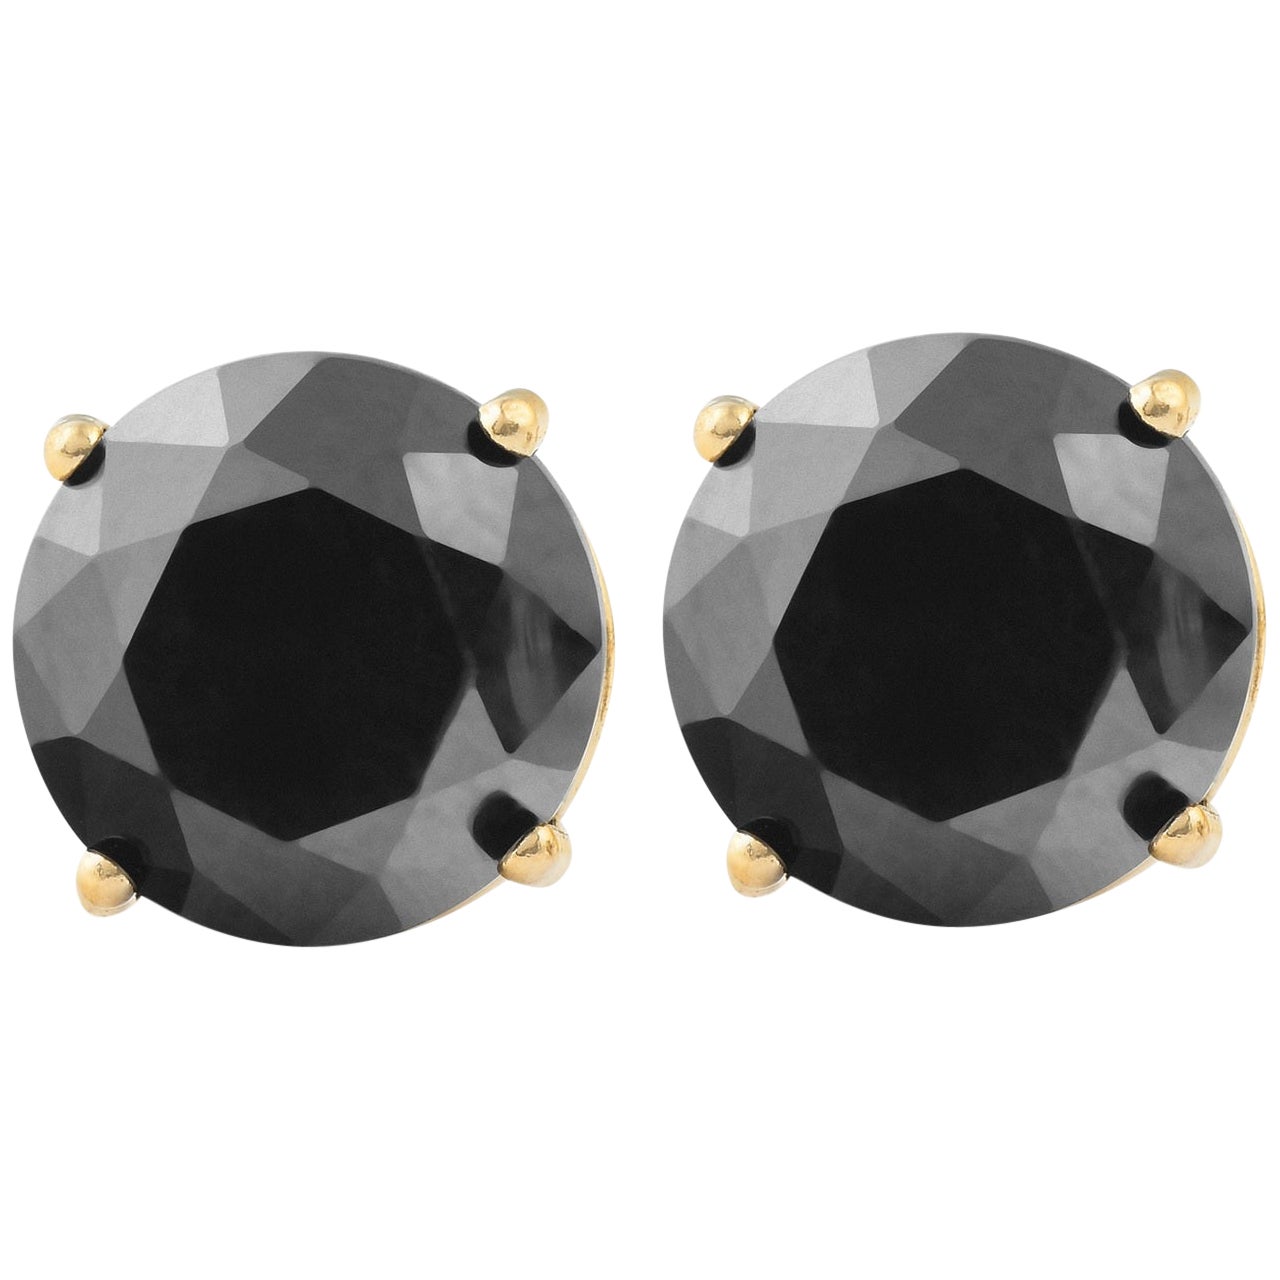 0.67 Carat Total Round Black Diamond Solitaire Stud Earrings in 14 K Yellow Gold